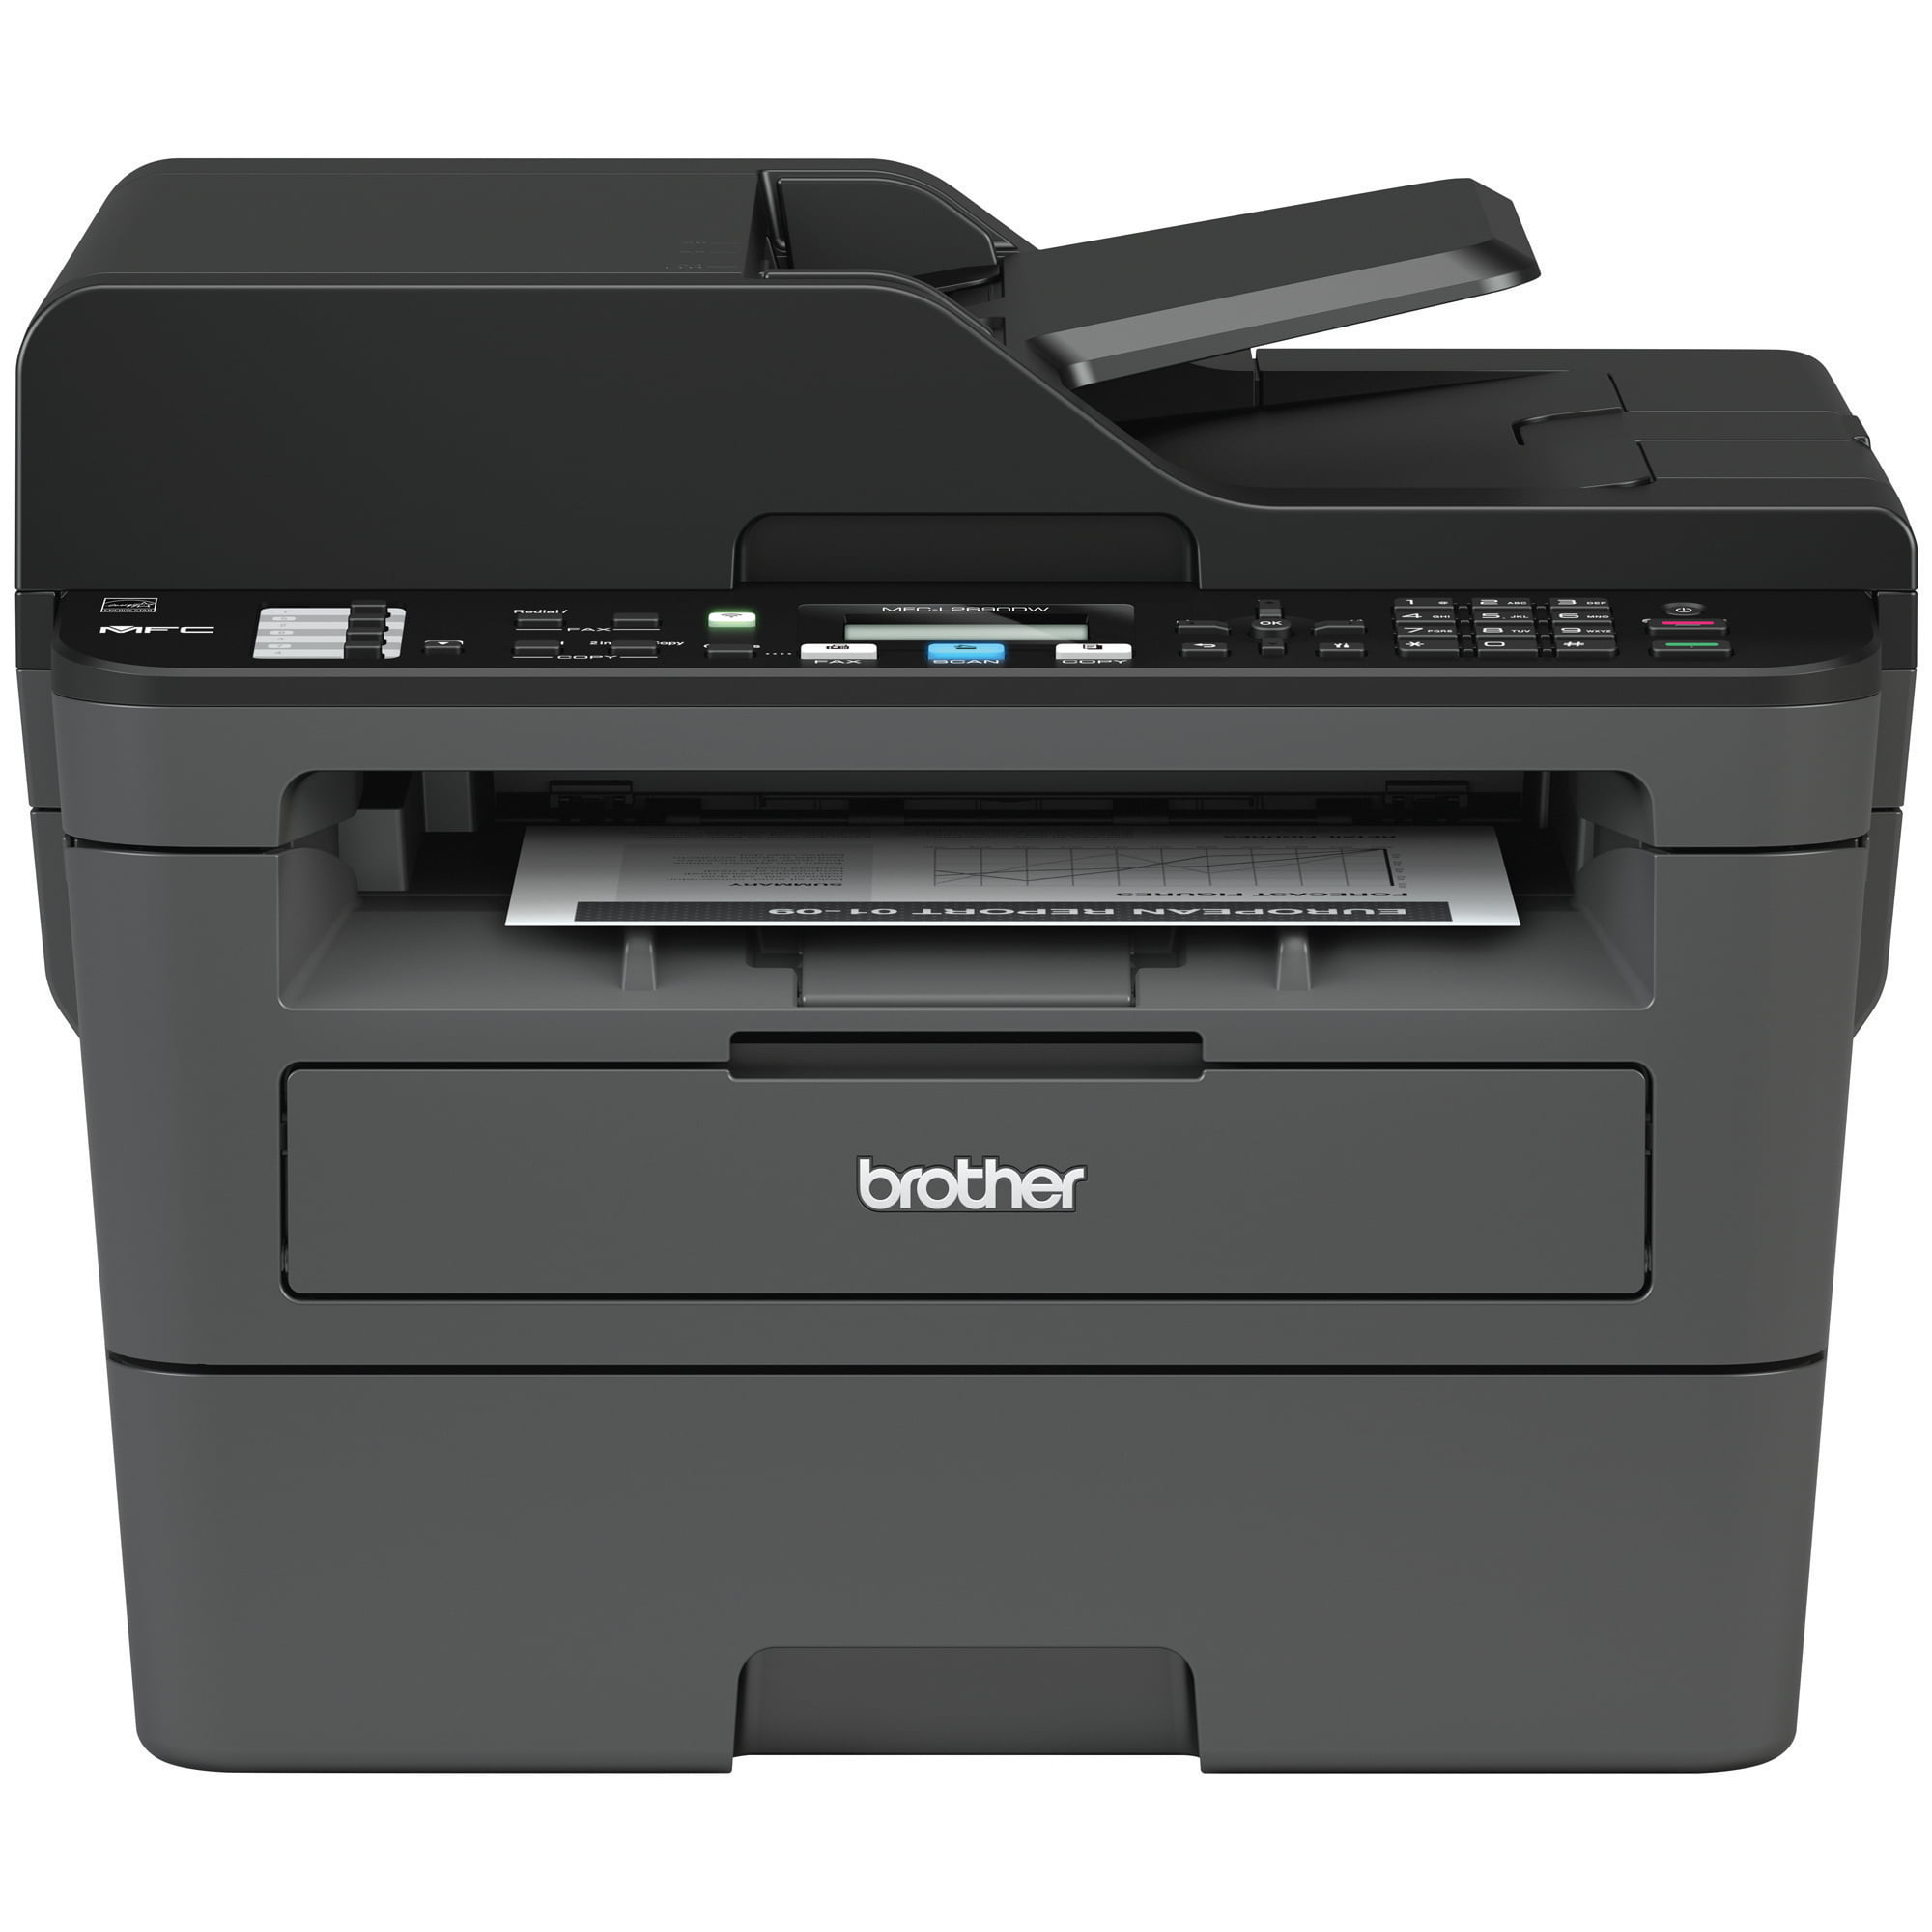 Brother MFC-L2690DW Monochrome Laser All-in-One Printer, Duplex Printing, Wireless Connectivity - image 1 of 10